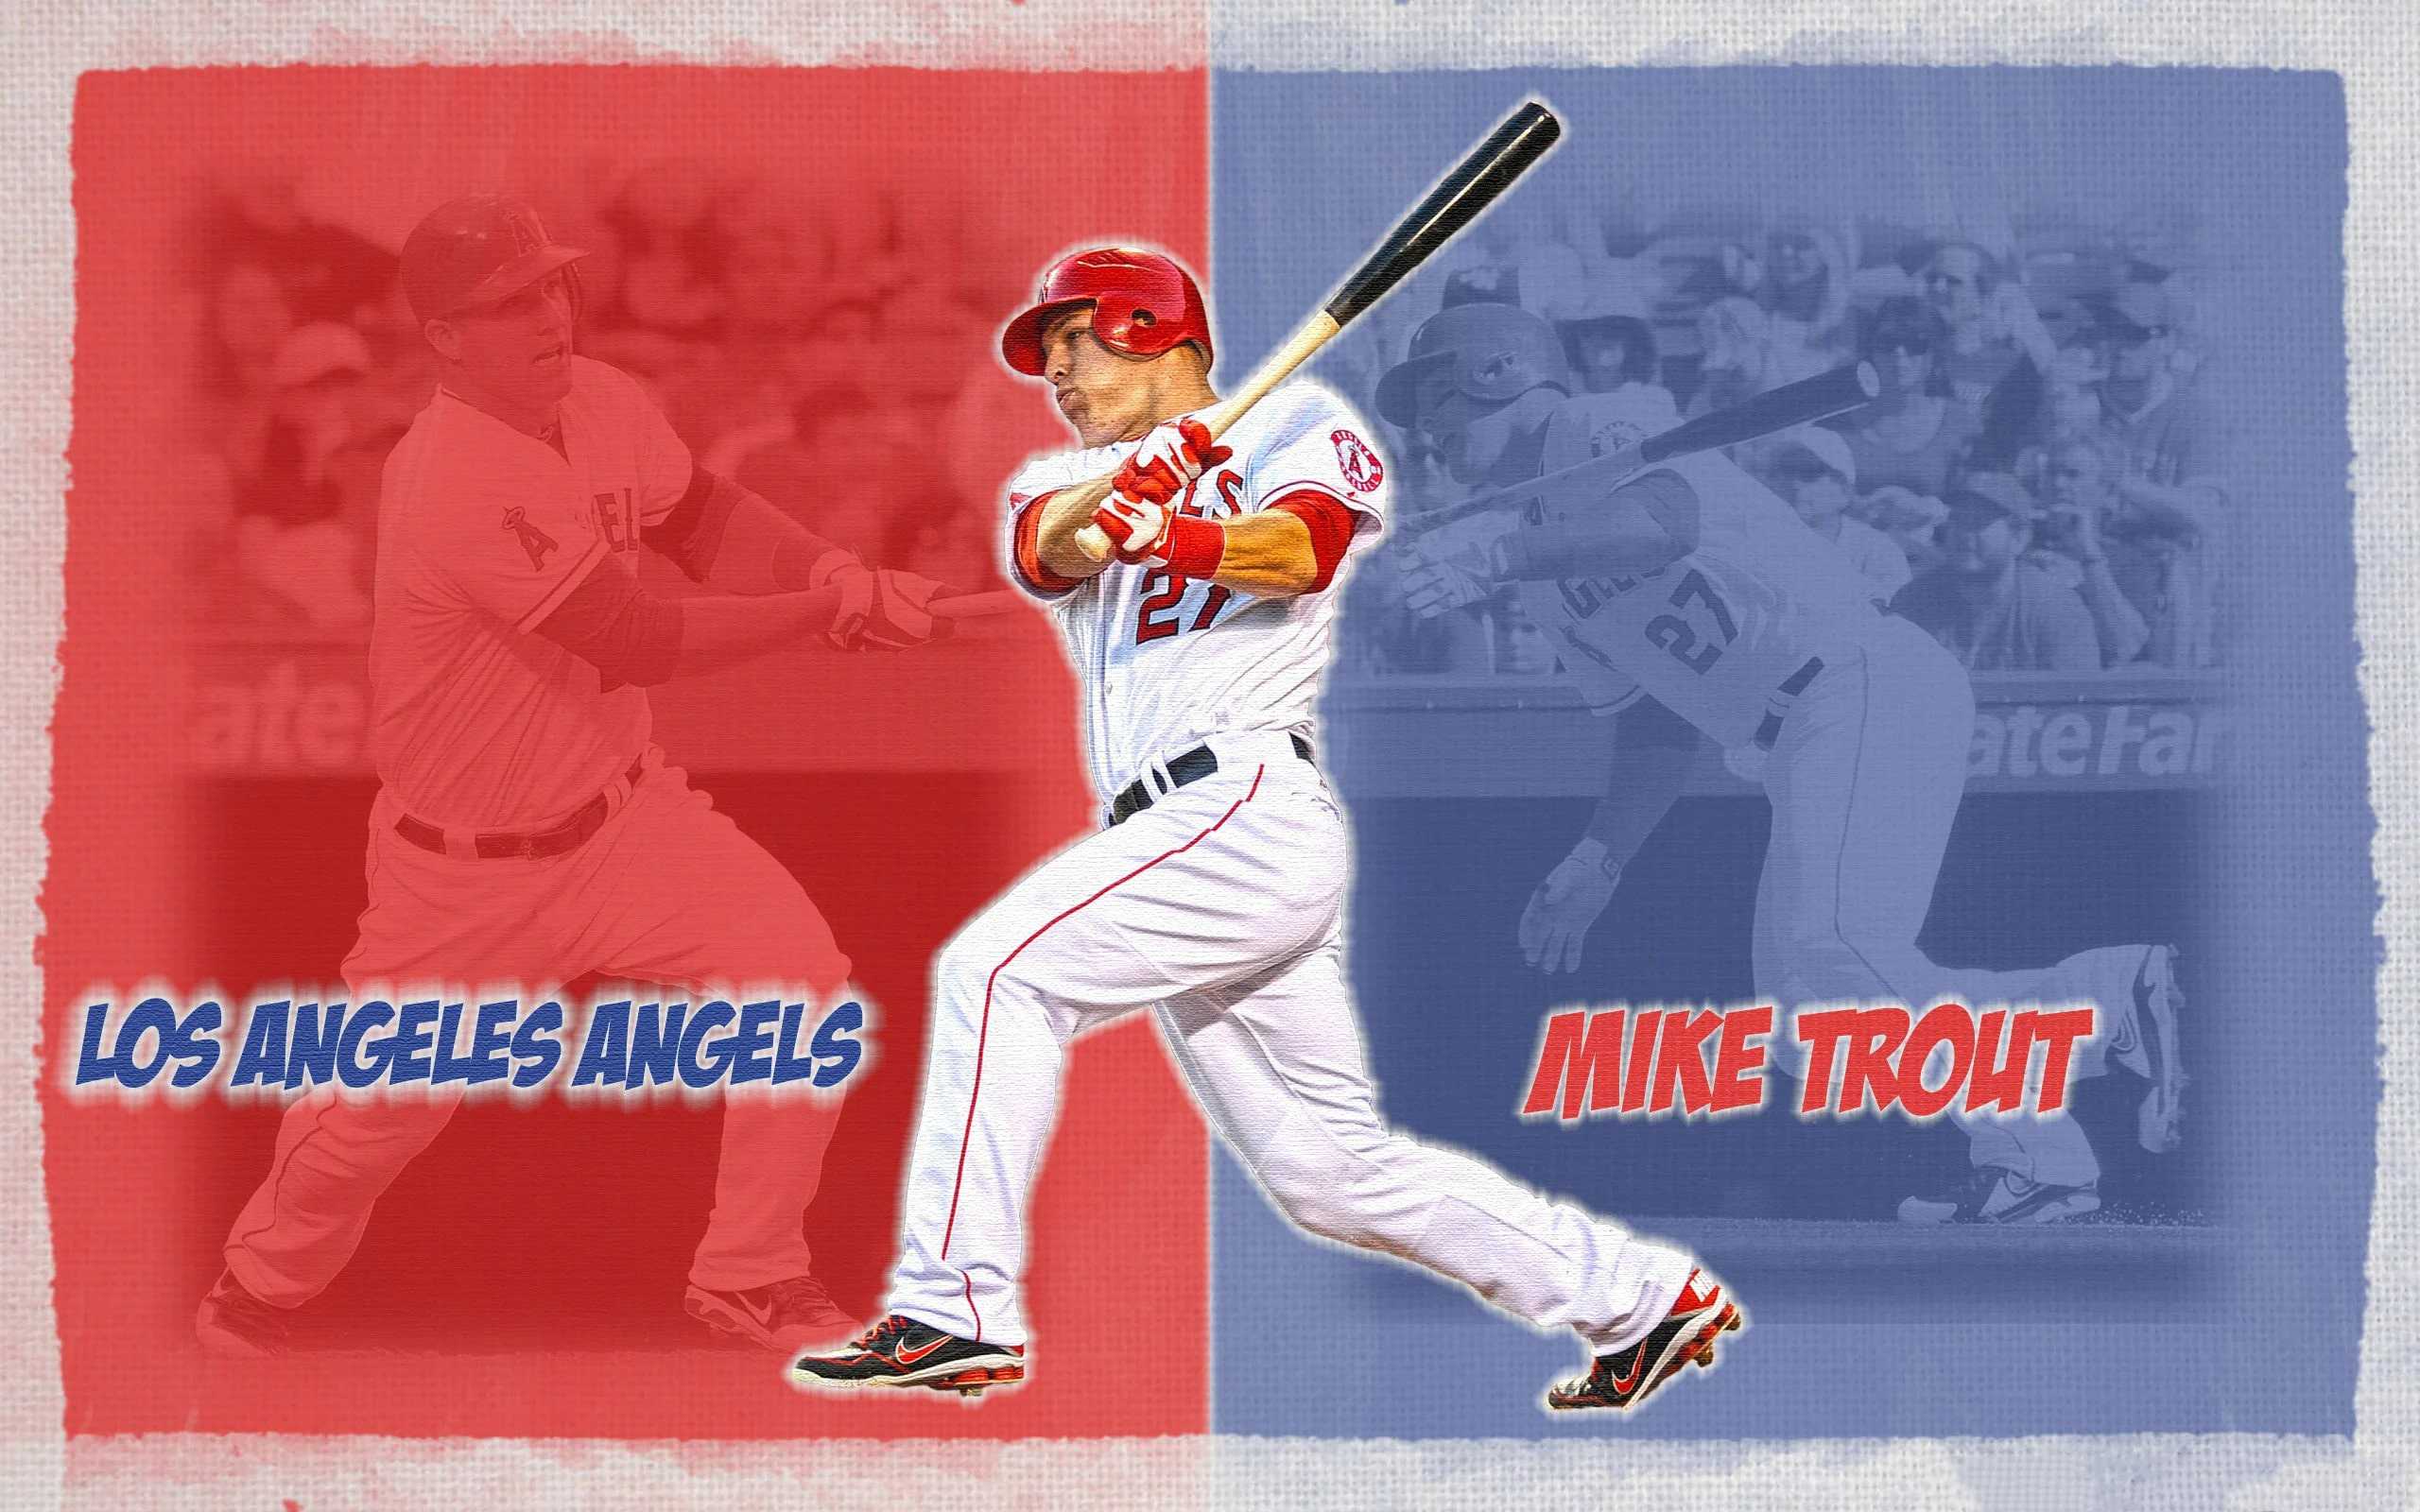 Wallpaper Mike Trout 1